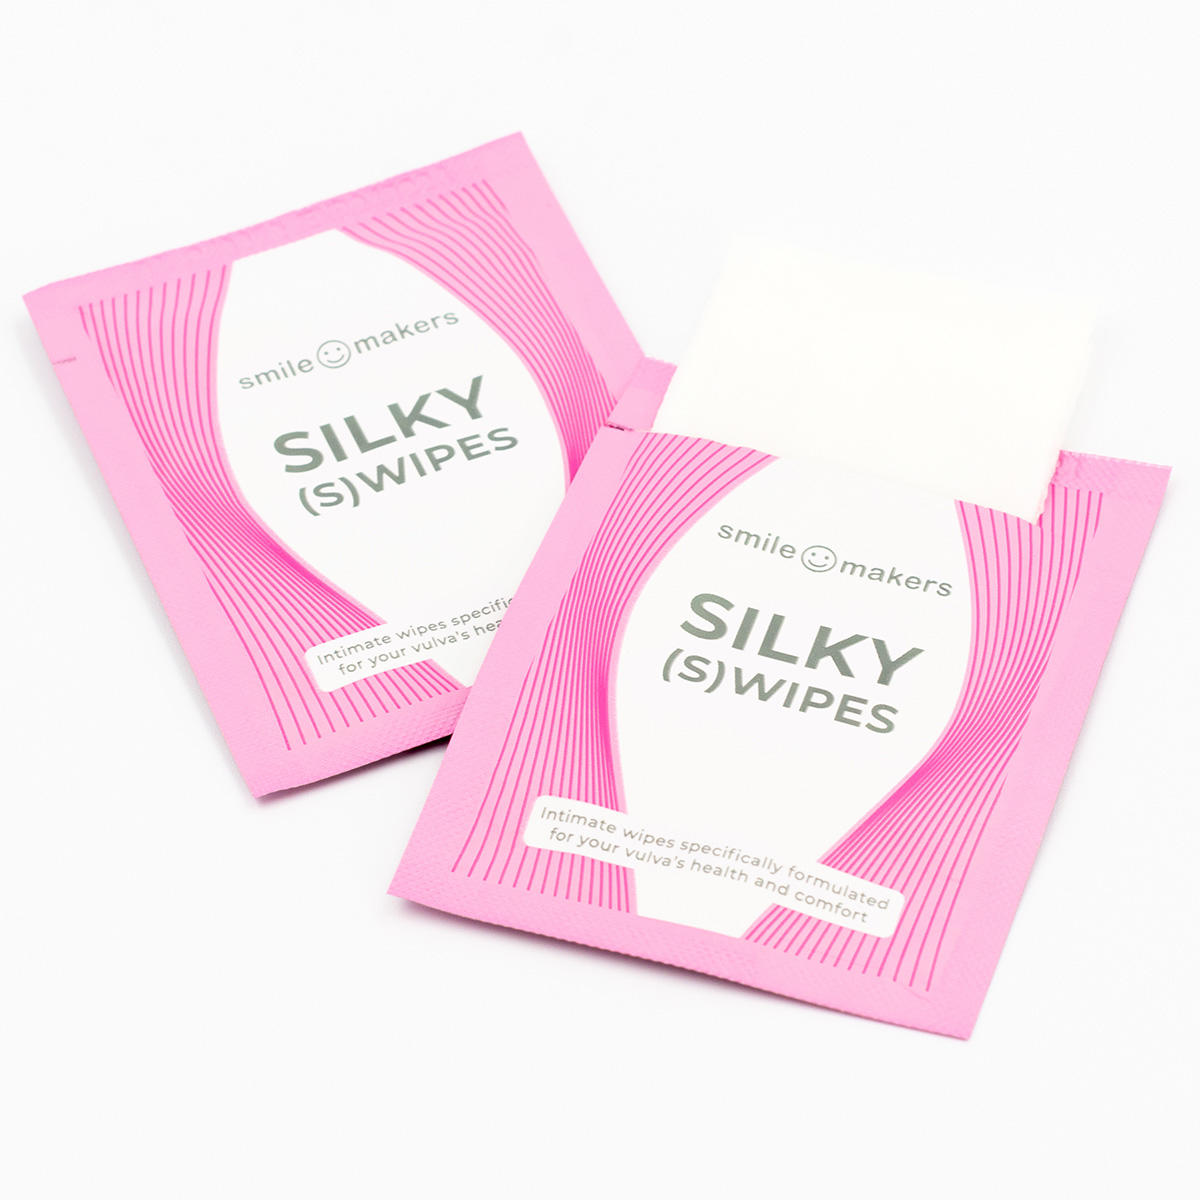 smile makers SILKY (S)WIPES Pro Packung 12 Stück - 3